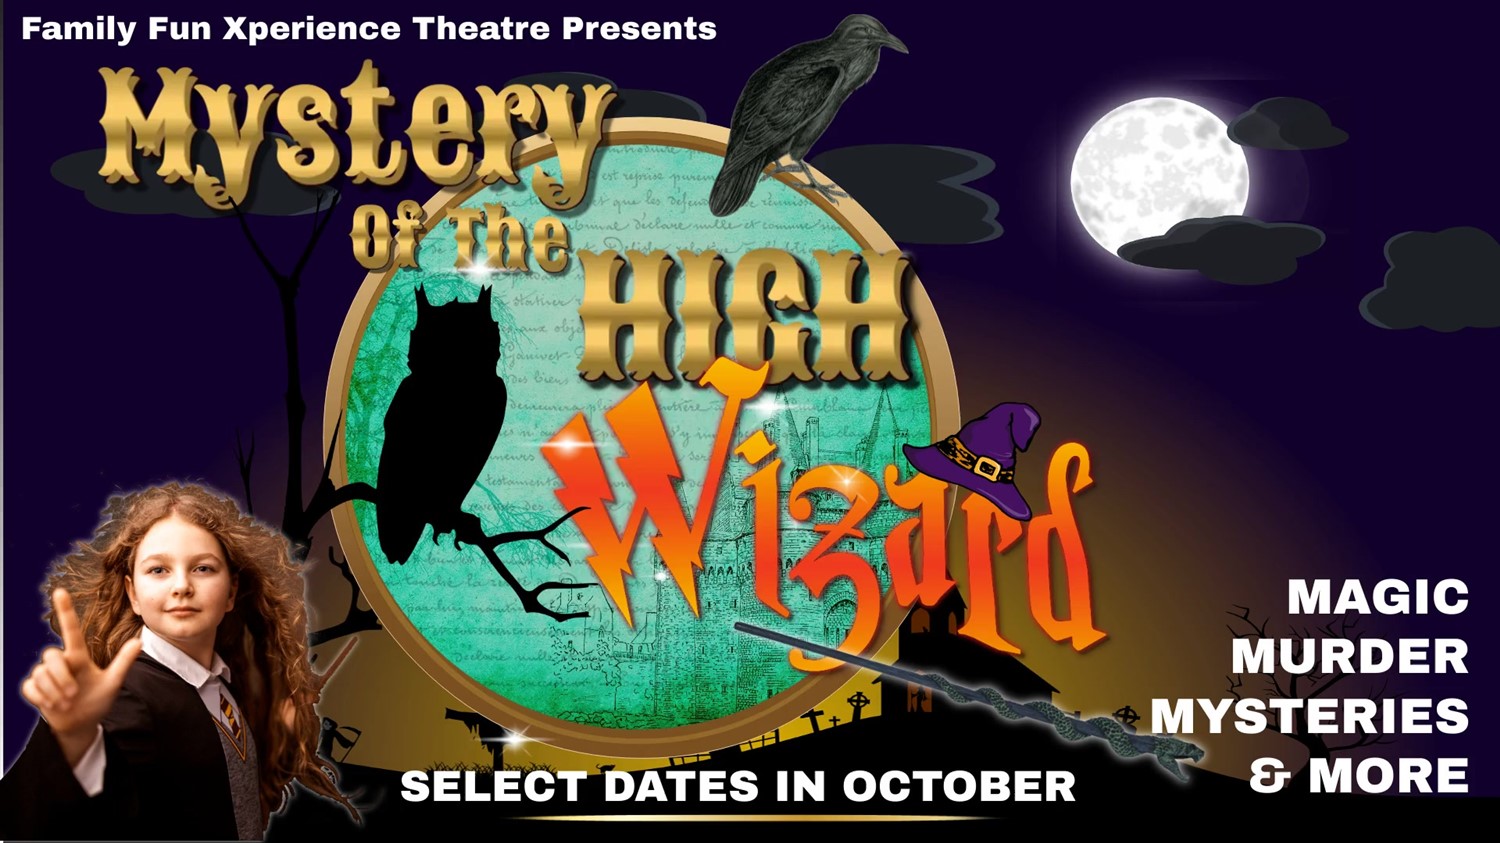 🗝 MYSTERY of the HIGH WIZARD⚡️ Magic, Murder, Mysteries, and More to solve! on Oct 21, 19:00@FFX Theatre - Pick a seat, Buy tickets and Get information on Family Fun Xperience tickets.ffxshow.org